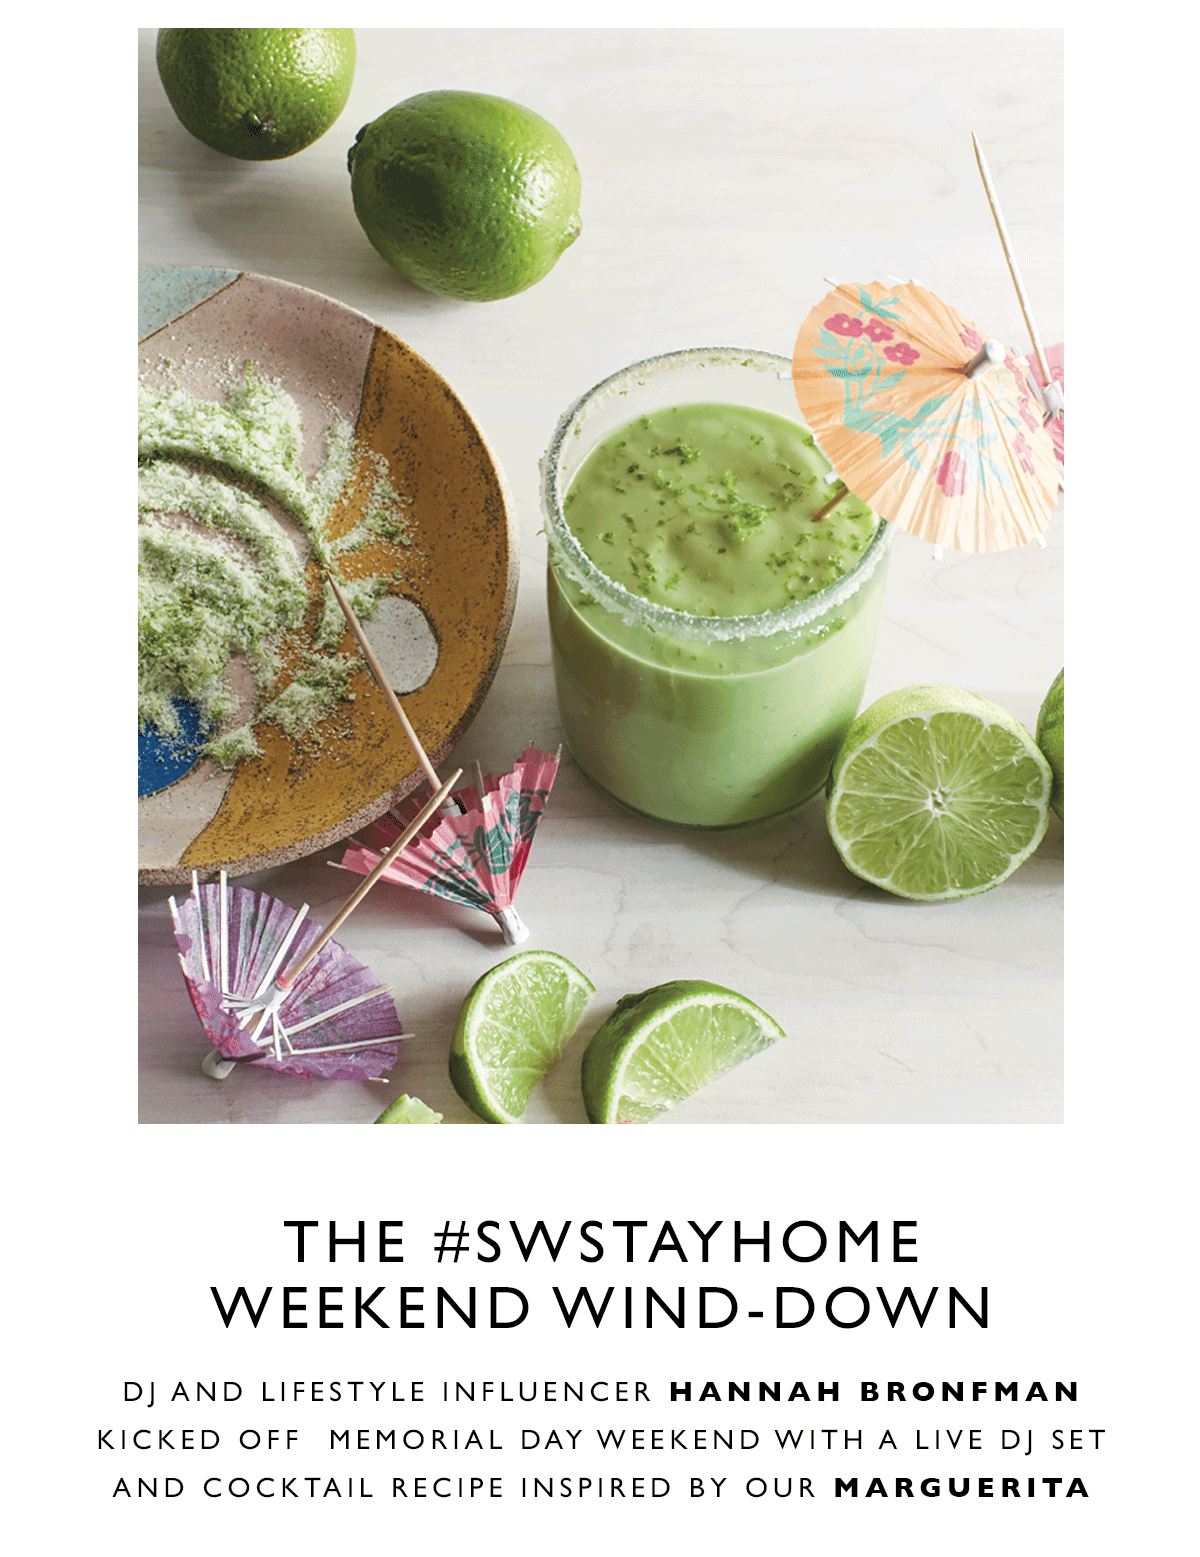  The #SWStayHome Weekend Wind-Down. DJ and lifestyle influencer Hannah Bronfman kicked off  Memorial Day Weekend with a live DJ set and cocktail recipe inspired by our MARGUERITA